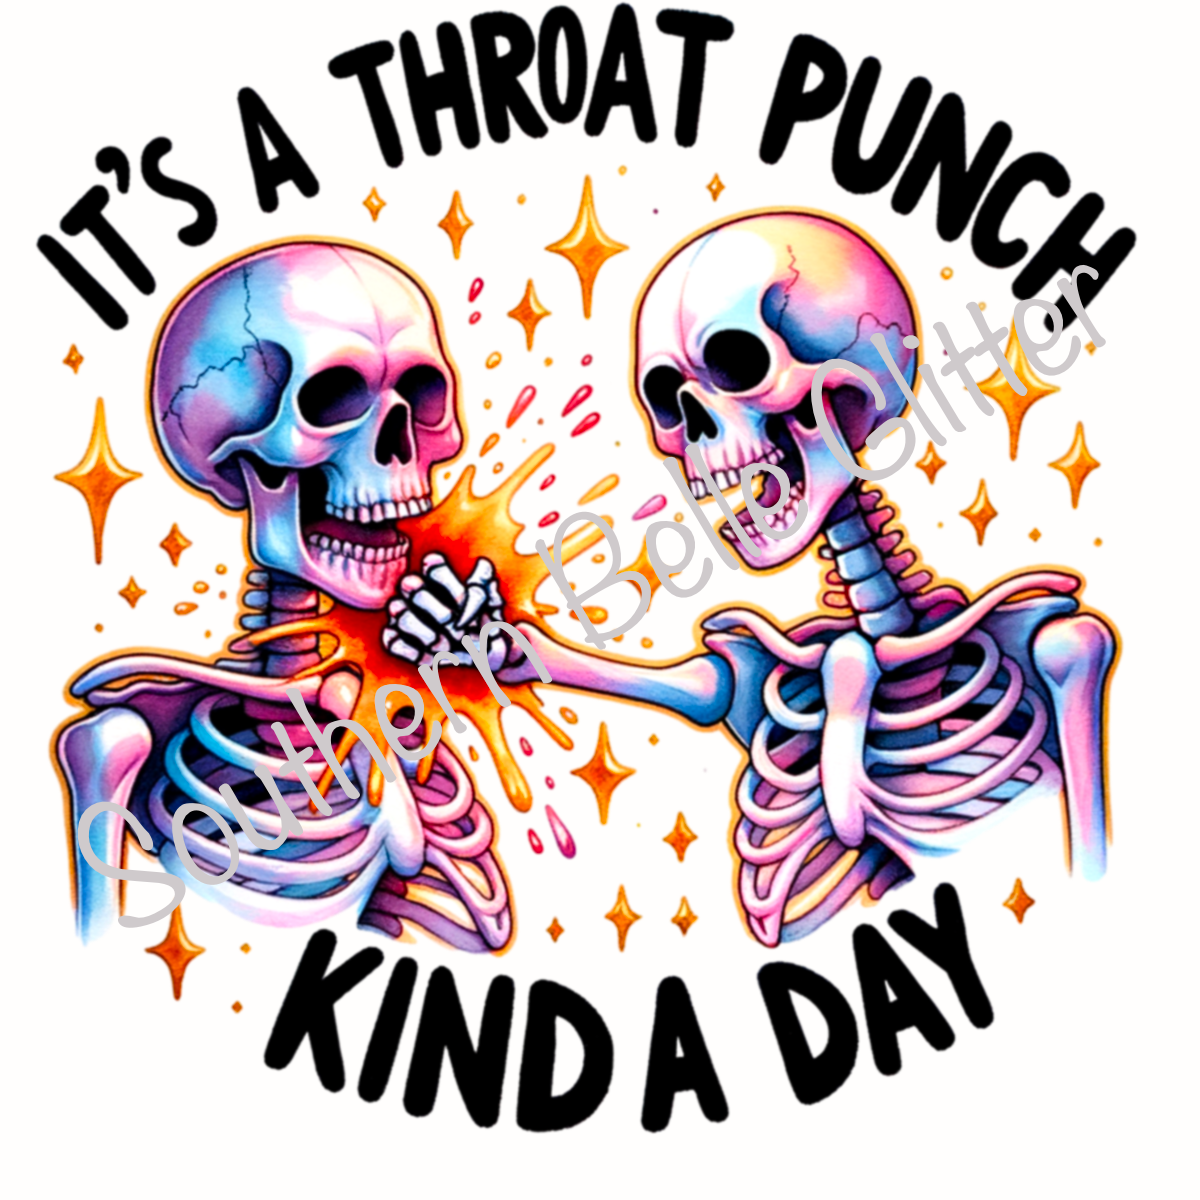 Throat punch kind of day